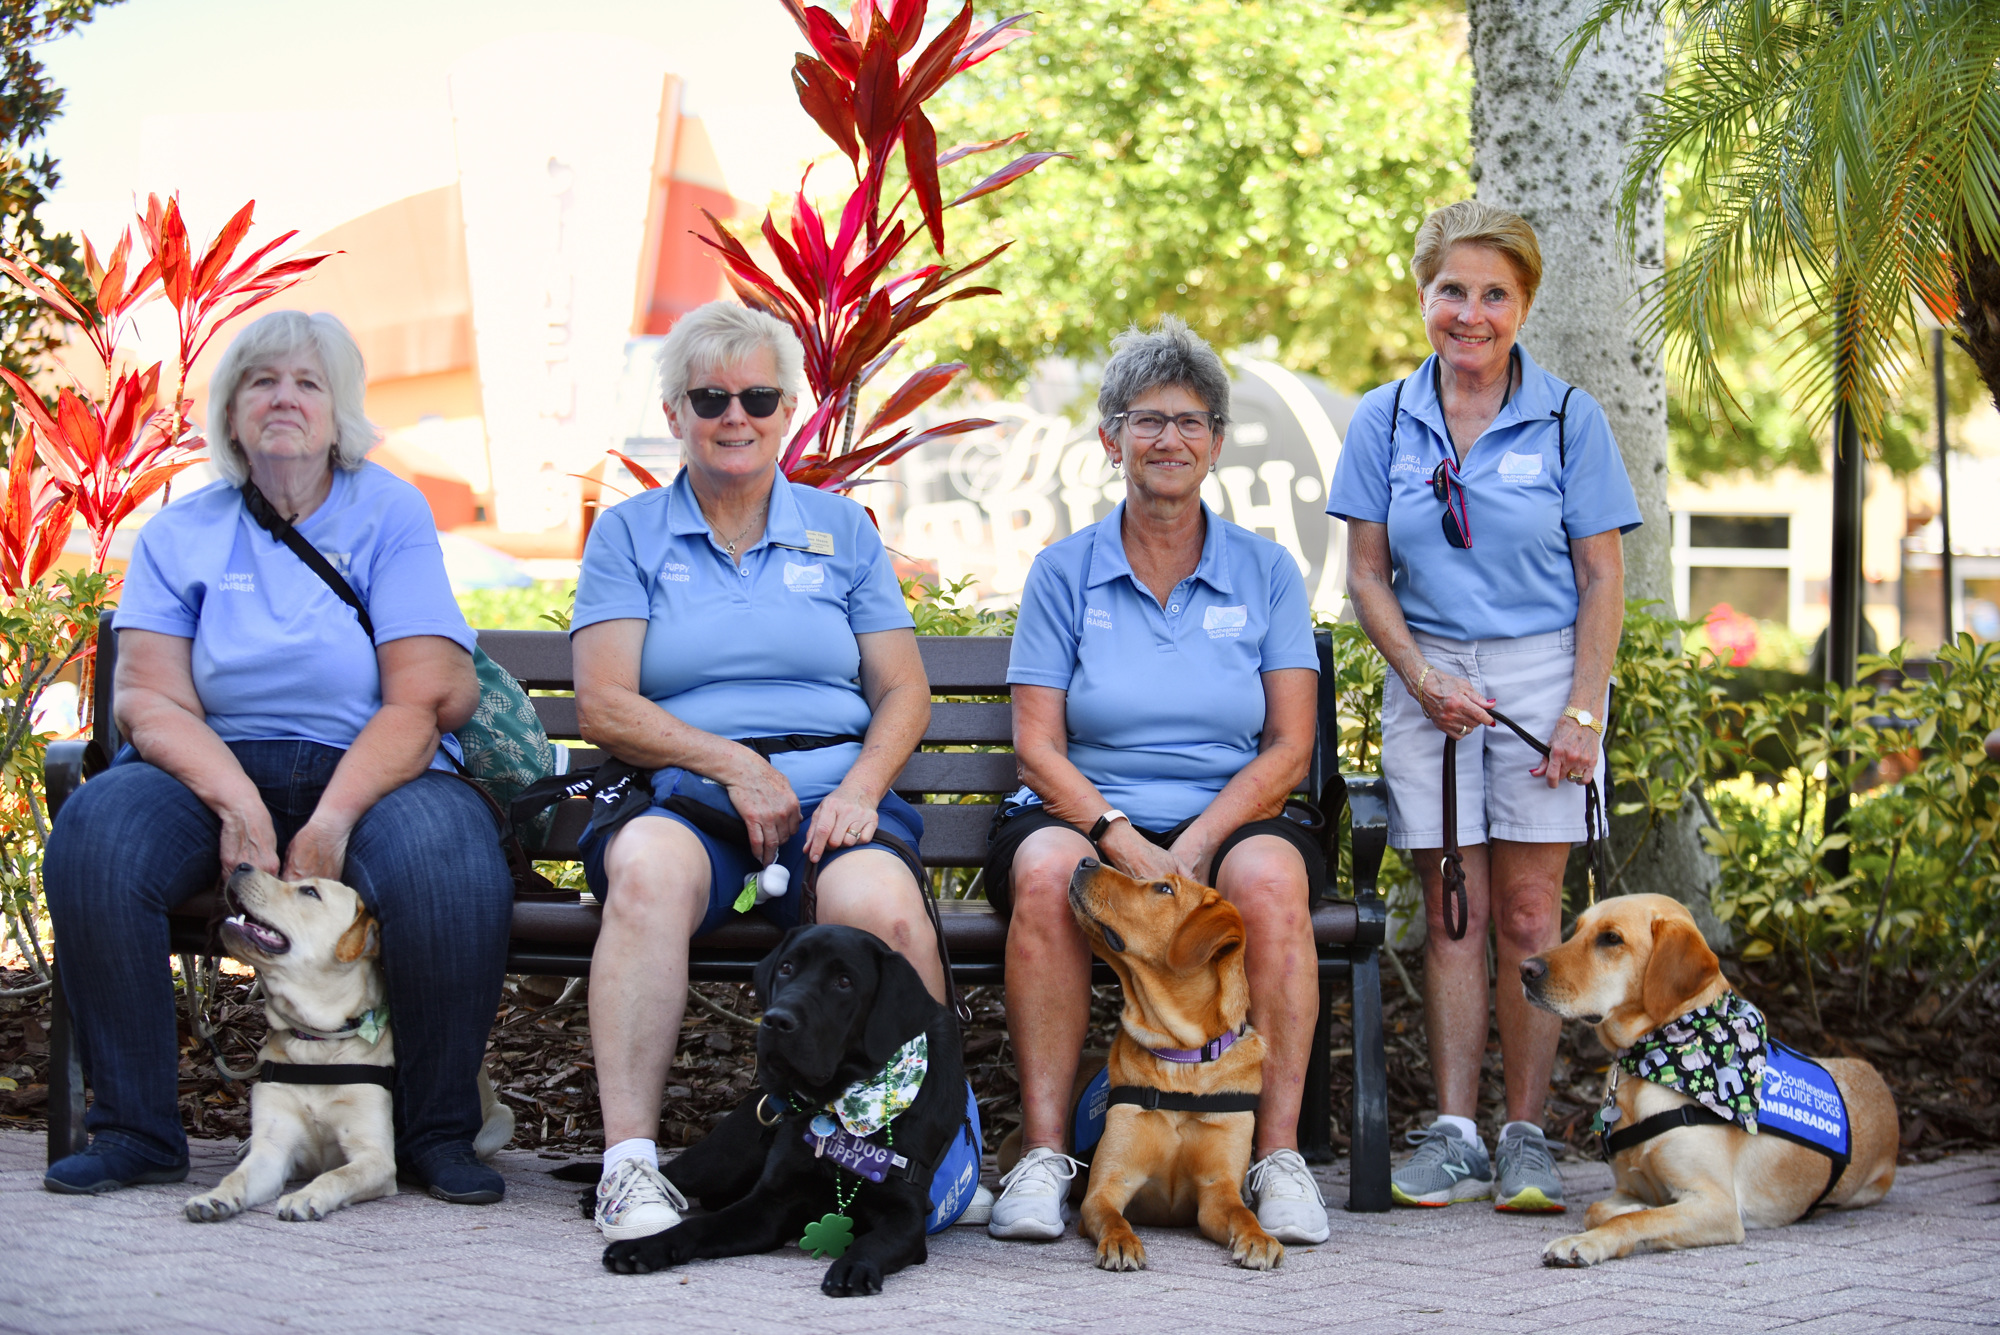 Puppy raisers Teresa Will, Jeanne Heere, Sandy Wilke and Alex Jeanroy with their guide dogs Daisy, Andre, Toma and Mason. (Photo by Heidi Kurpiela)